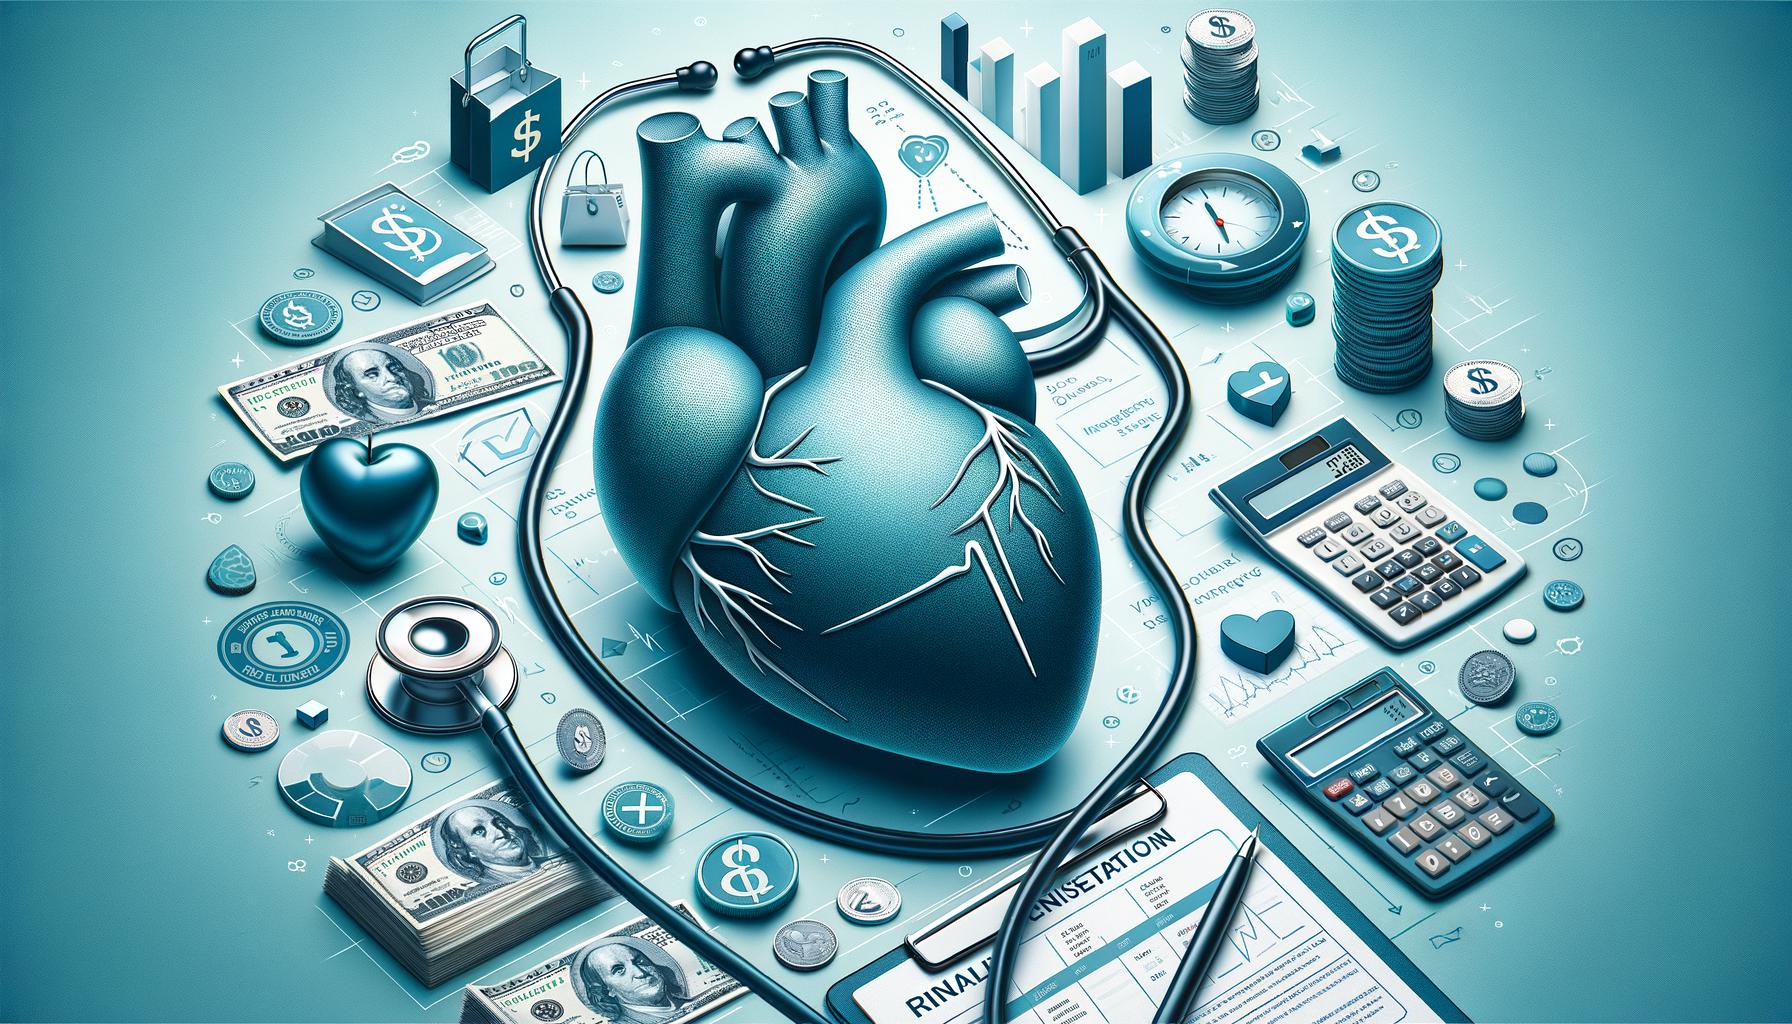 Banner image illustrating financial planning for cardiac ablation costs with heart, stethoscope, dollar signs, and a planning